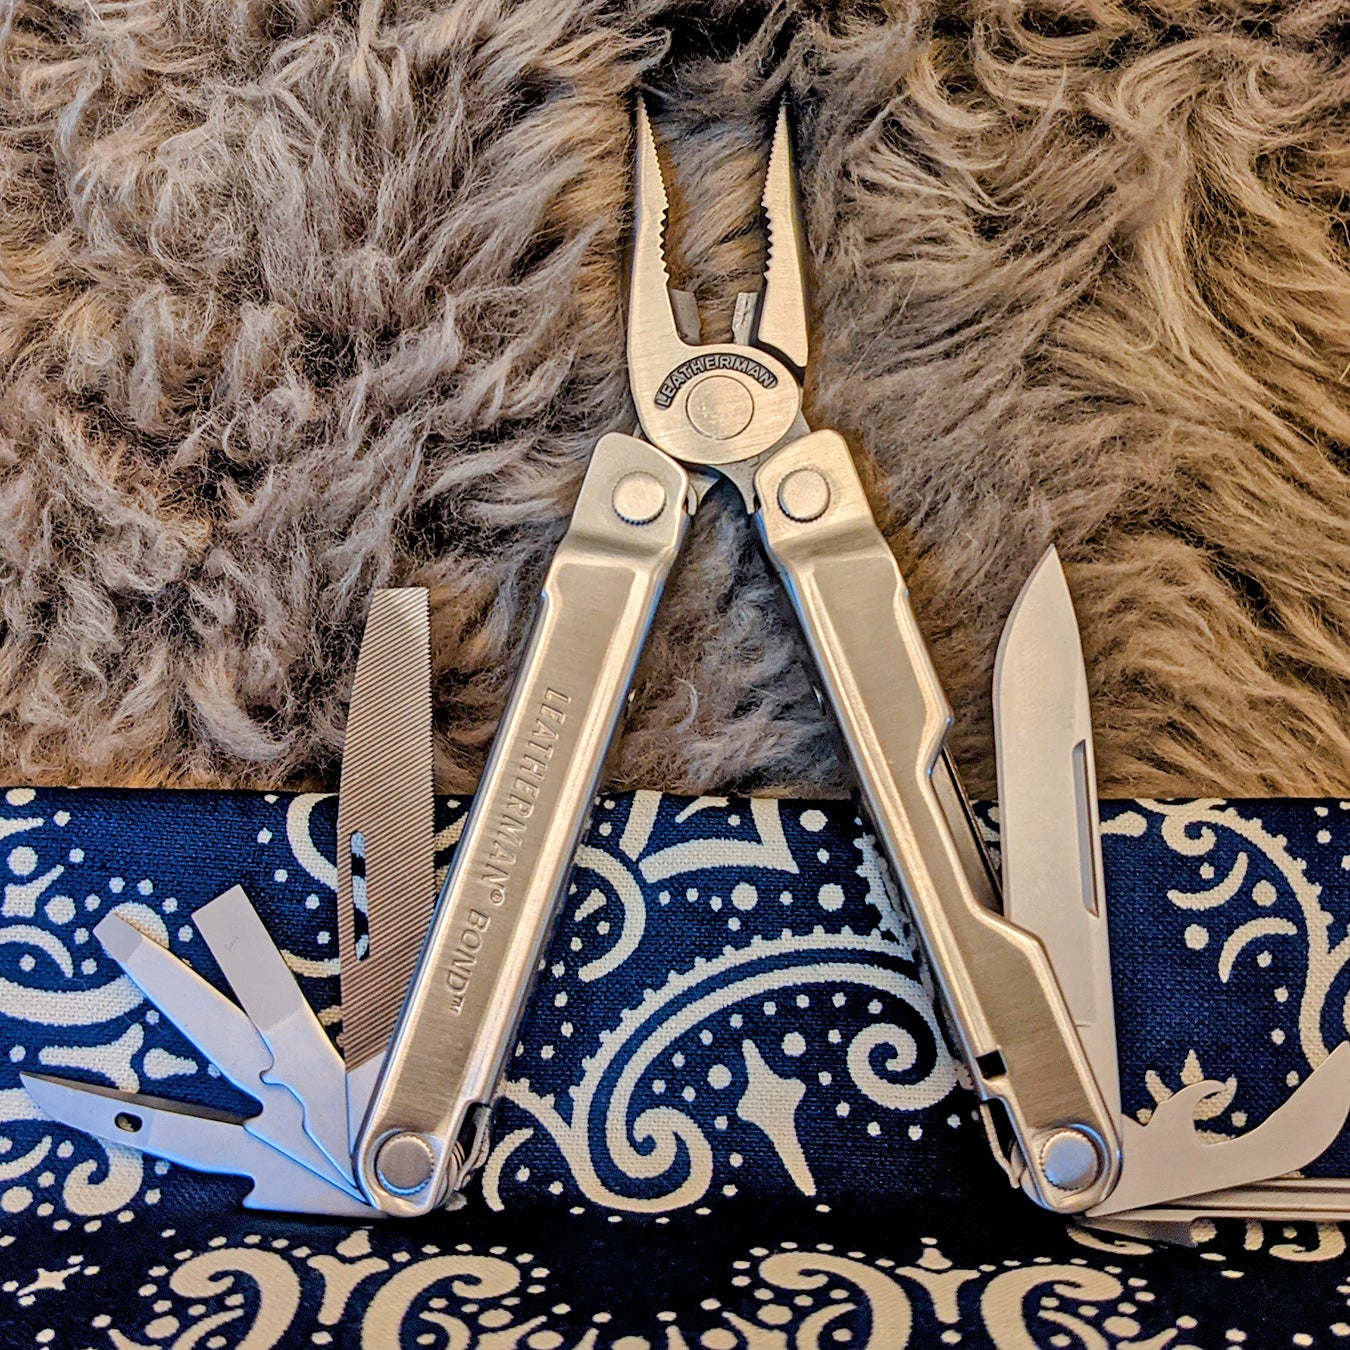 Leatherman Arc Review: a Nearly Perfect Multi-Tool